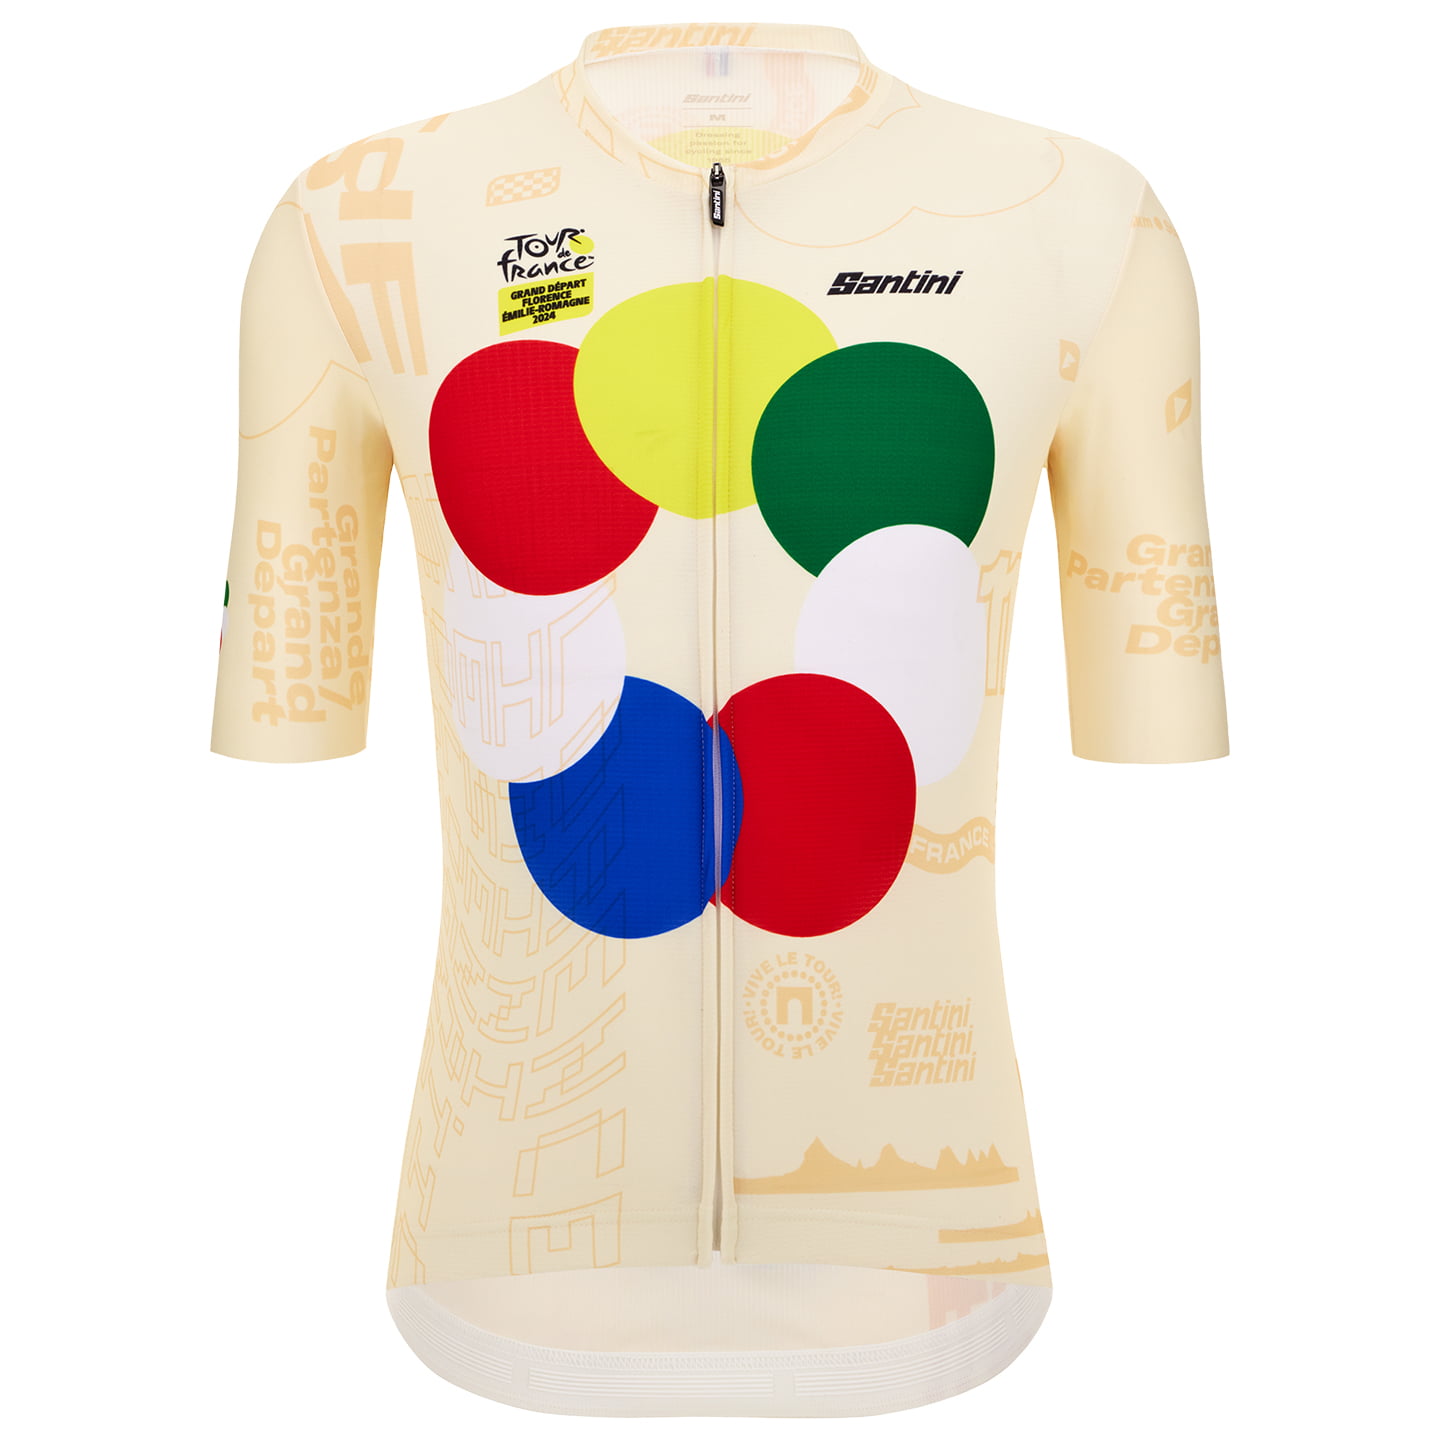 TOUR DE FRANCE Grand Depart Florence 2024 Short Sleeve Jersey, for men, size L, Cycling shirt, Cycle clothing